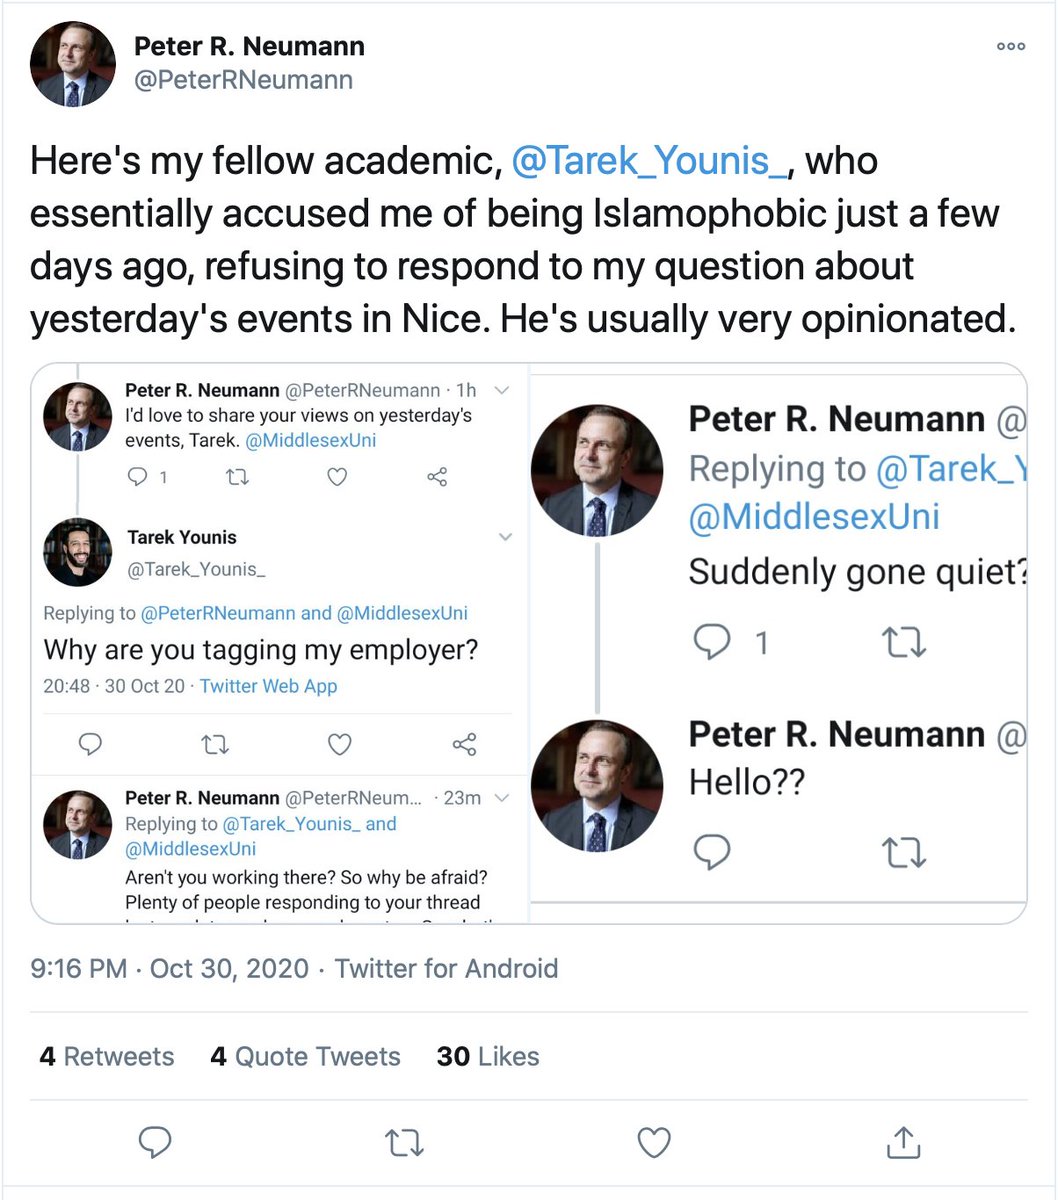 It seems  @PeterRNeumann is attempting to erase his history of abuse. Here's the main thread he just deleted, here for posterity